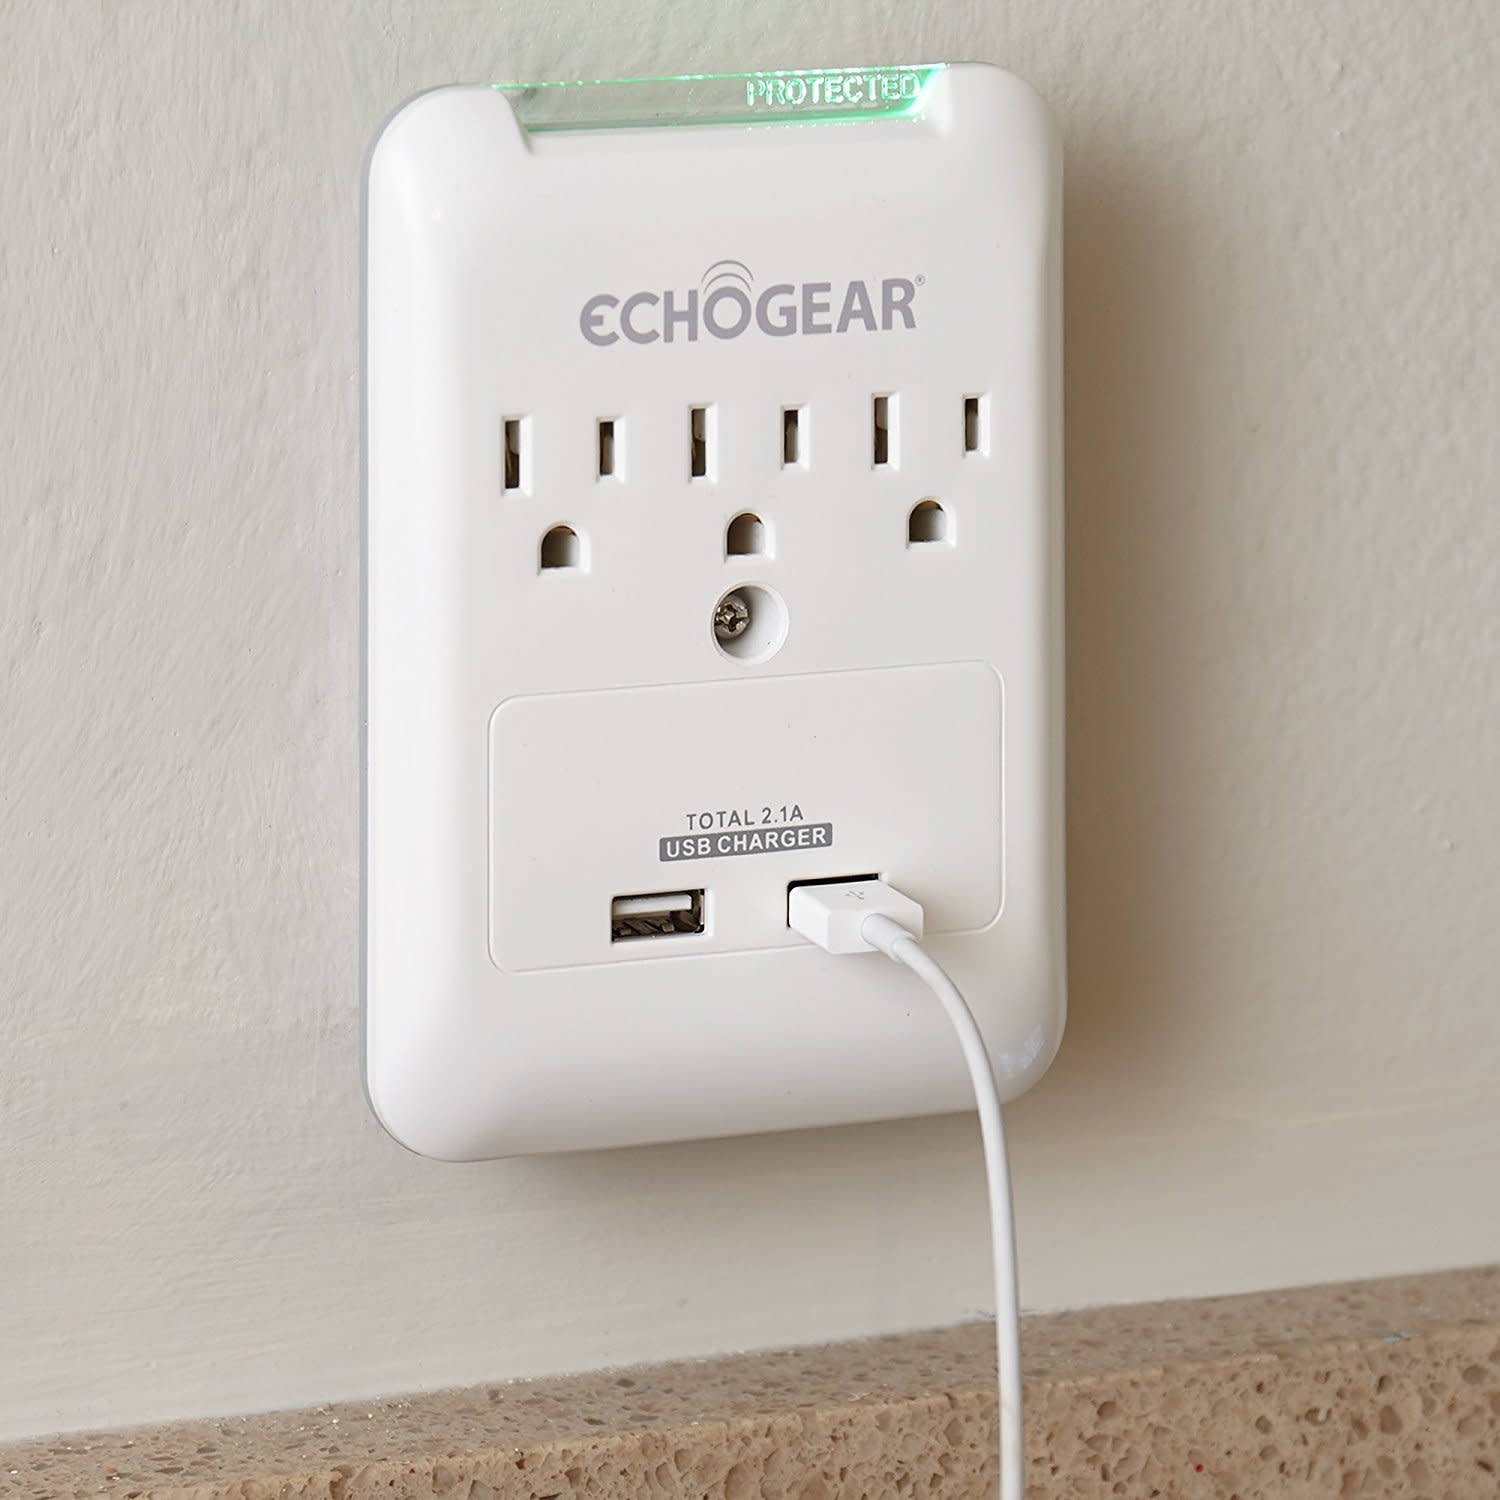 surge echogear usb protector protectors low profile mount ac outlet outlets power ports amp electronics